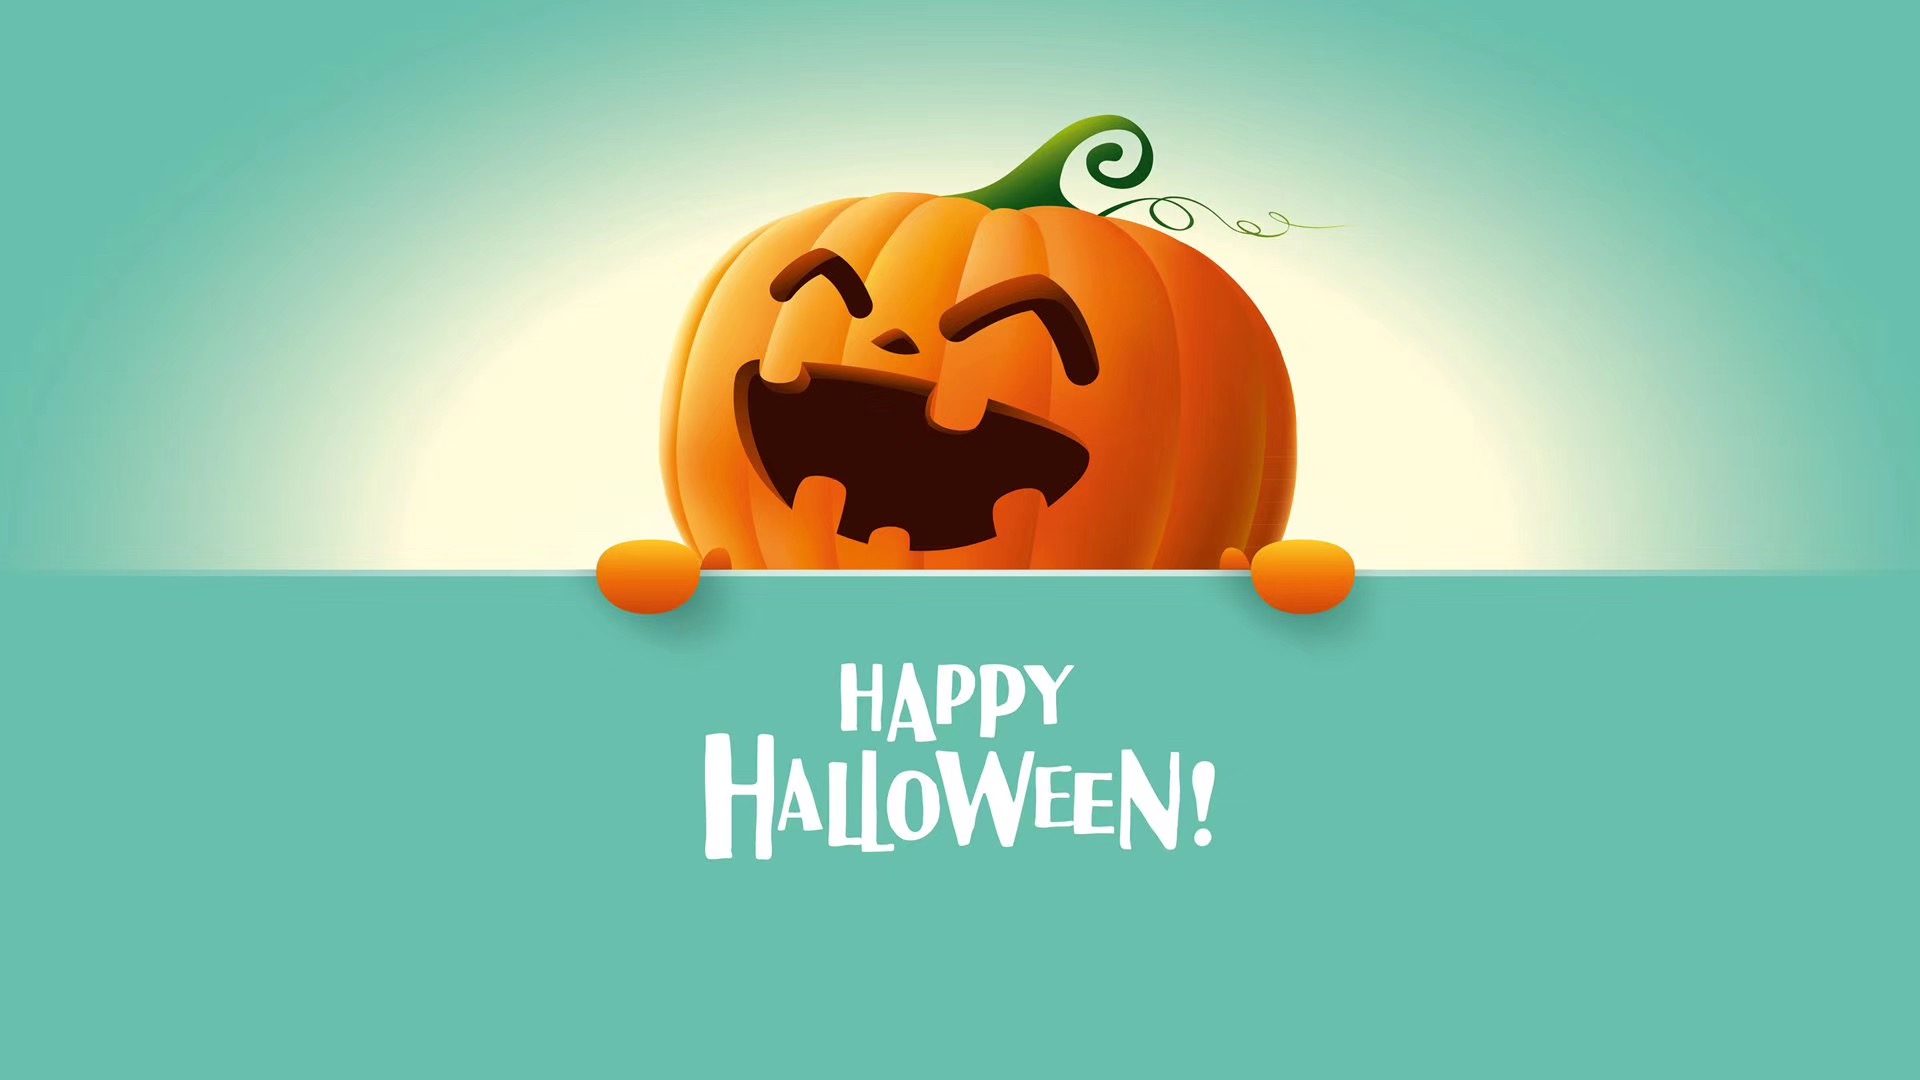 Happy Halloween to all friends